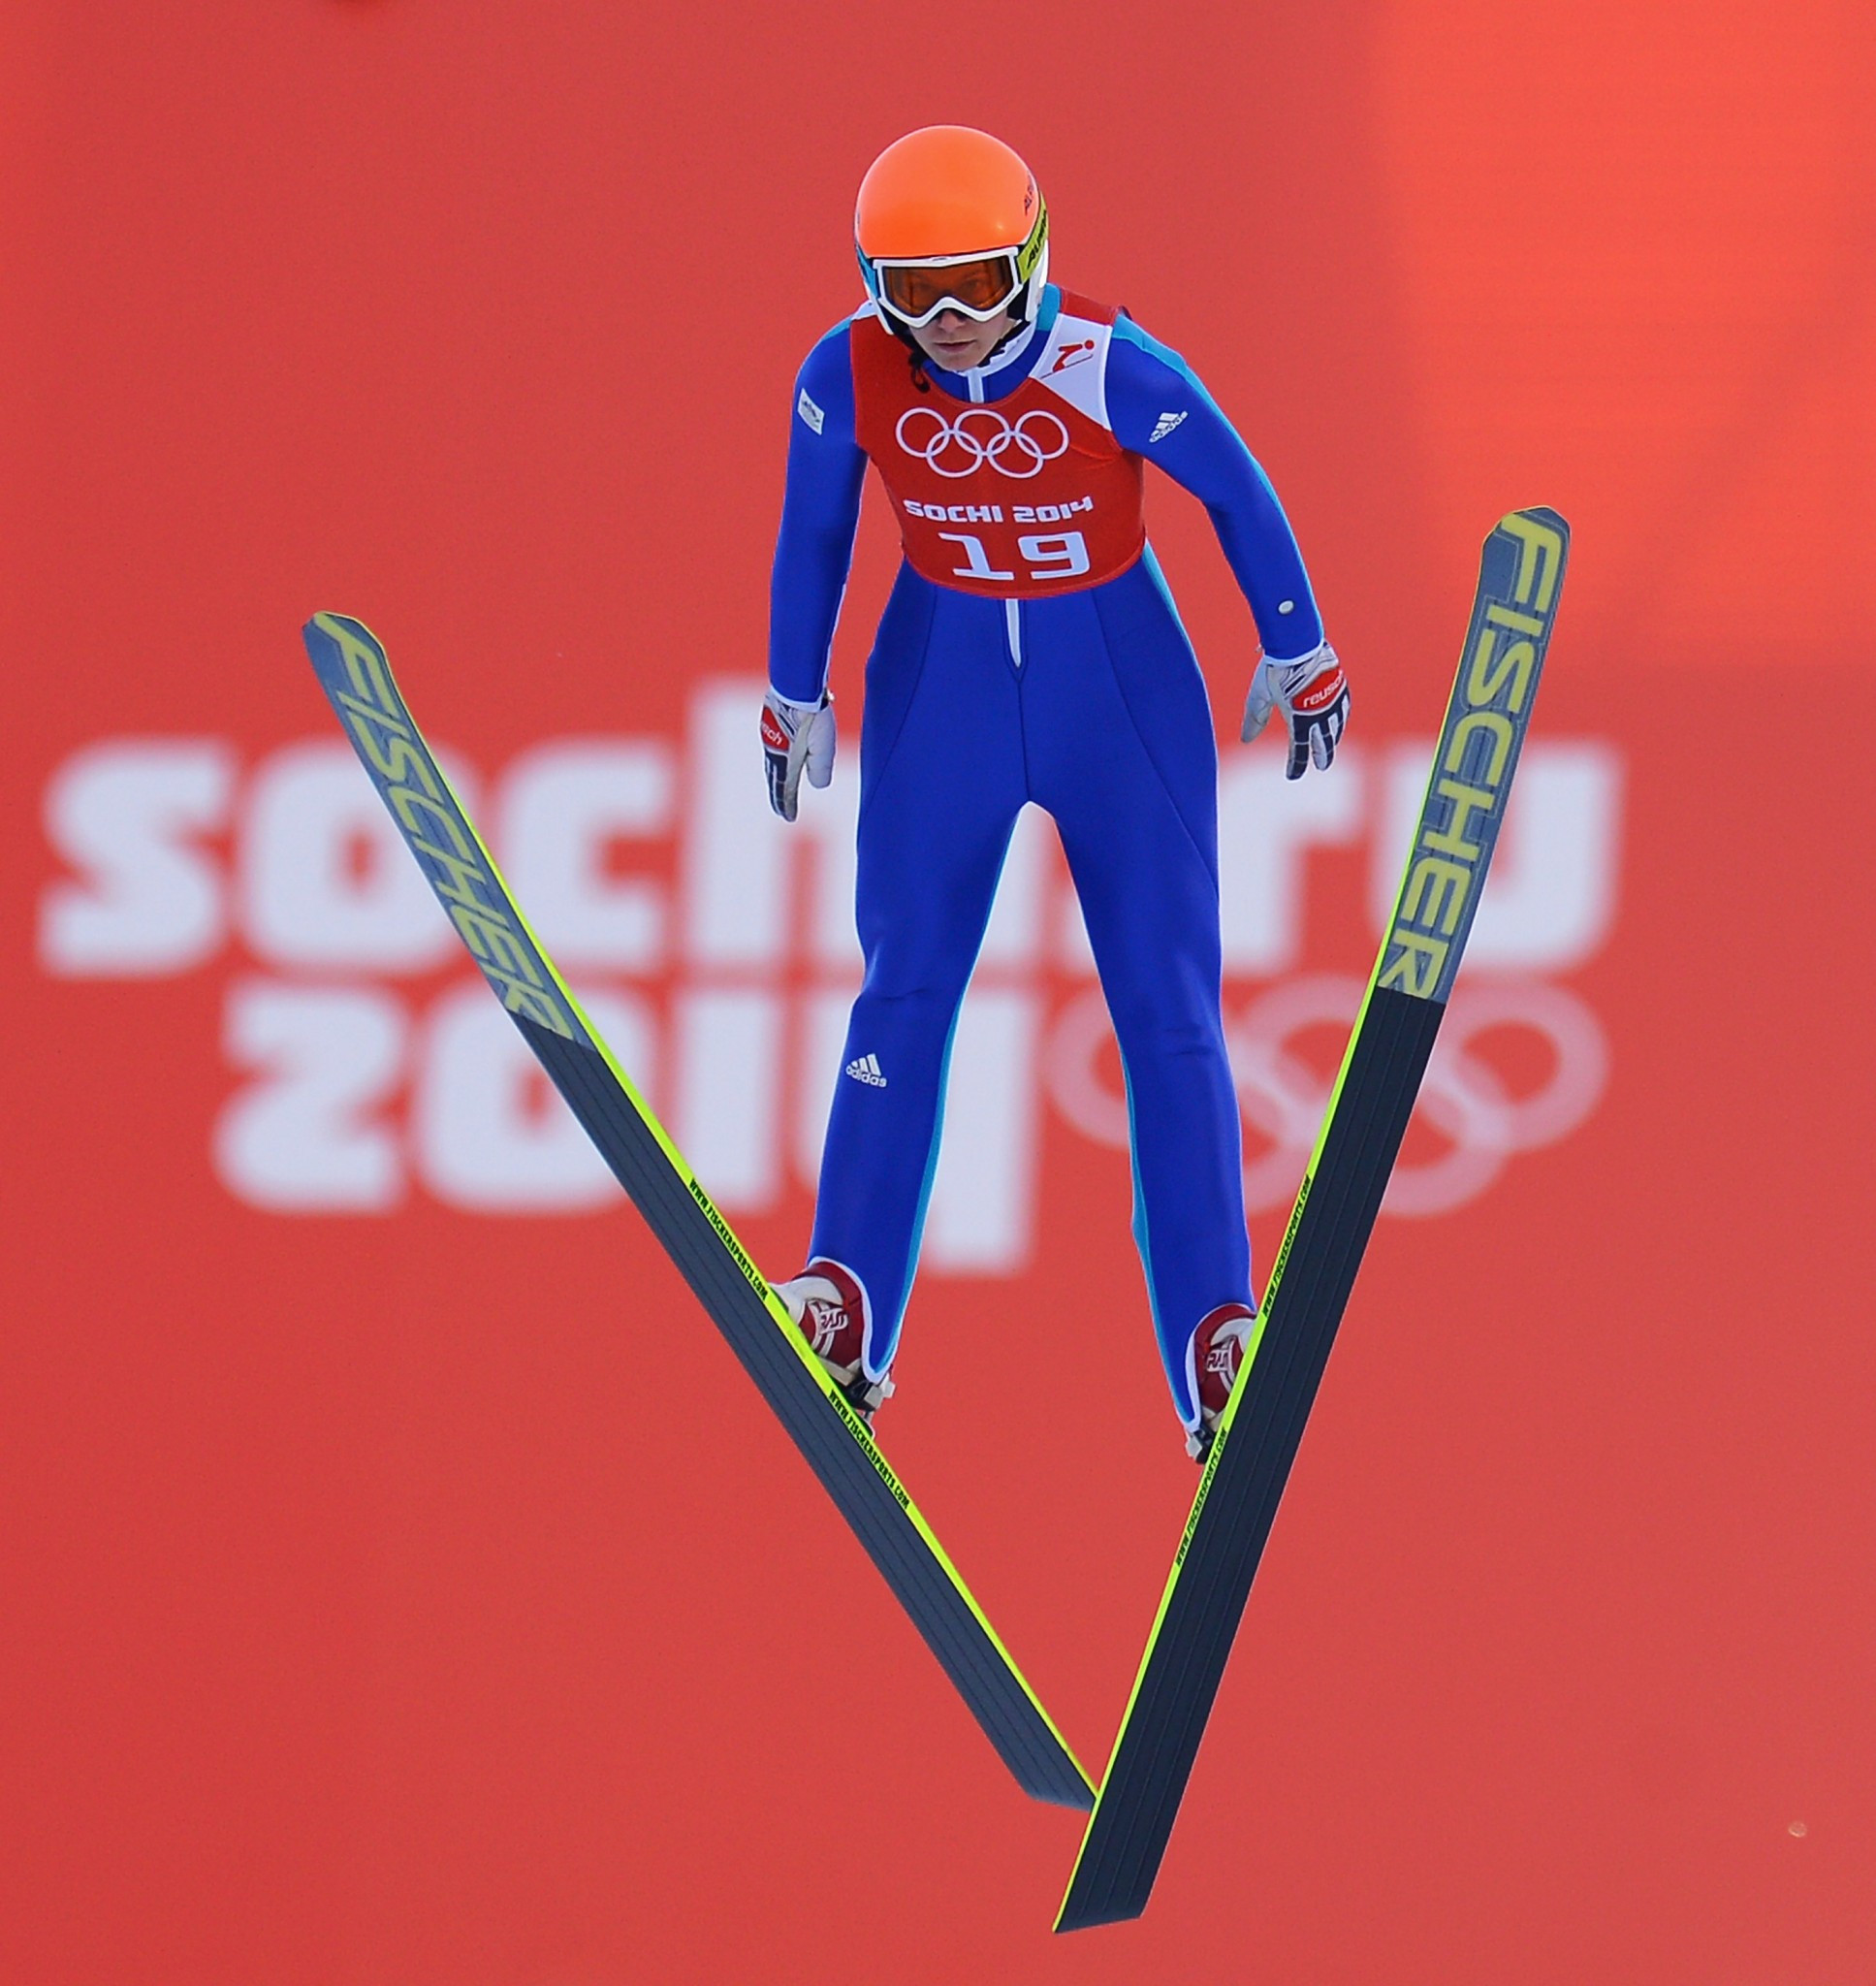 Eva Logar competed at the Sochi 2014 Winter Olympics ©Getty Images